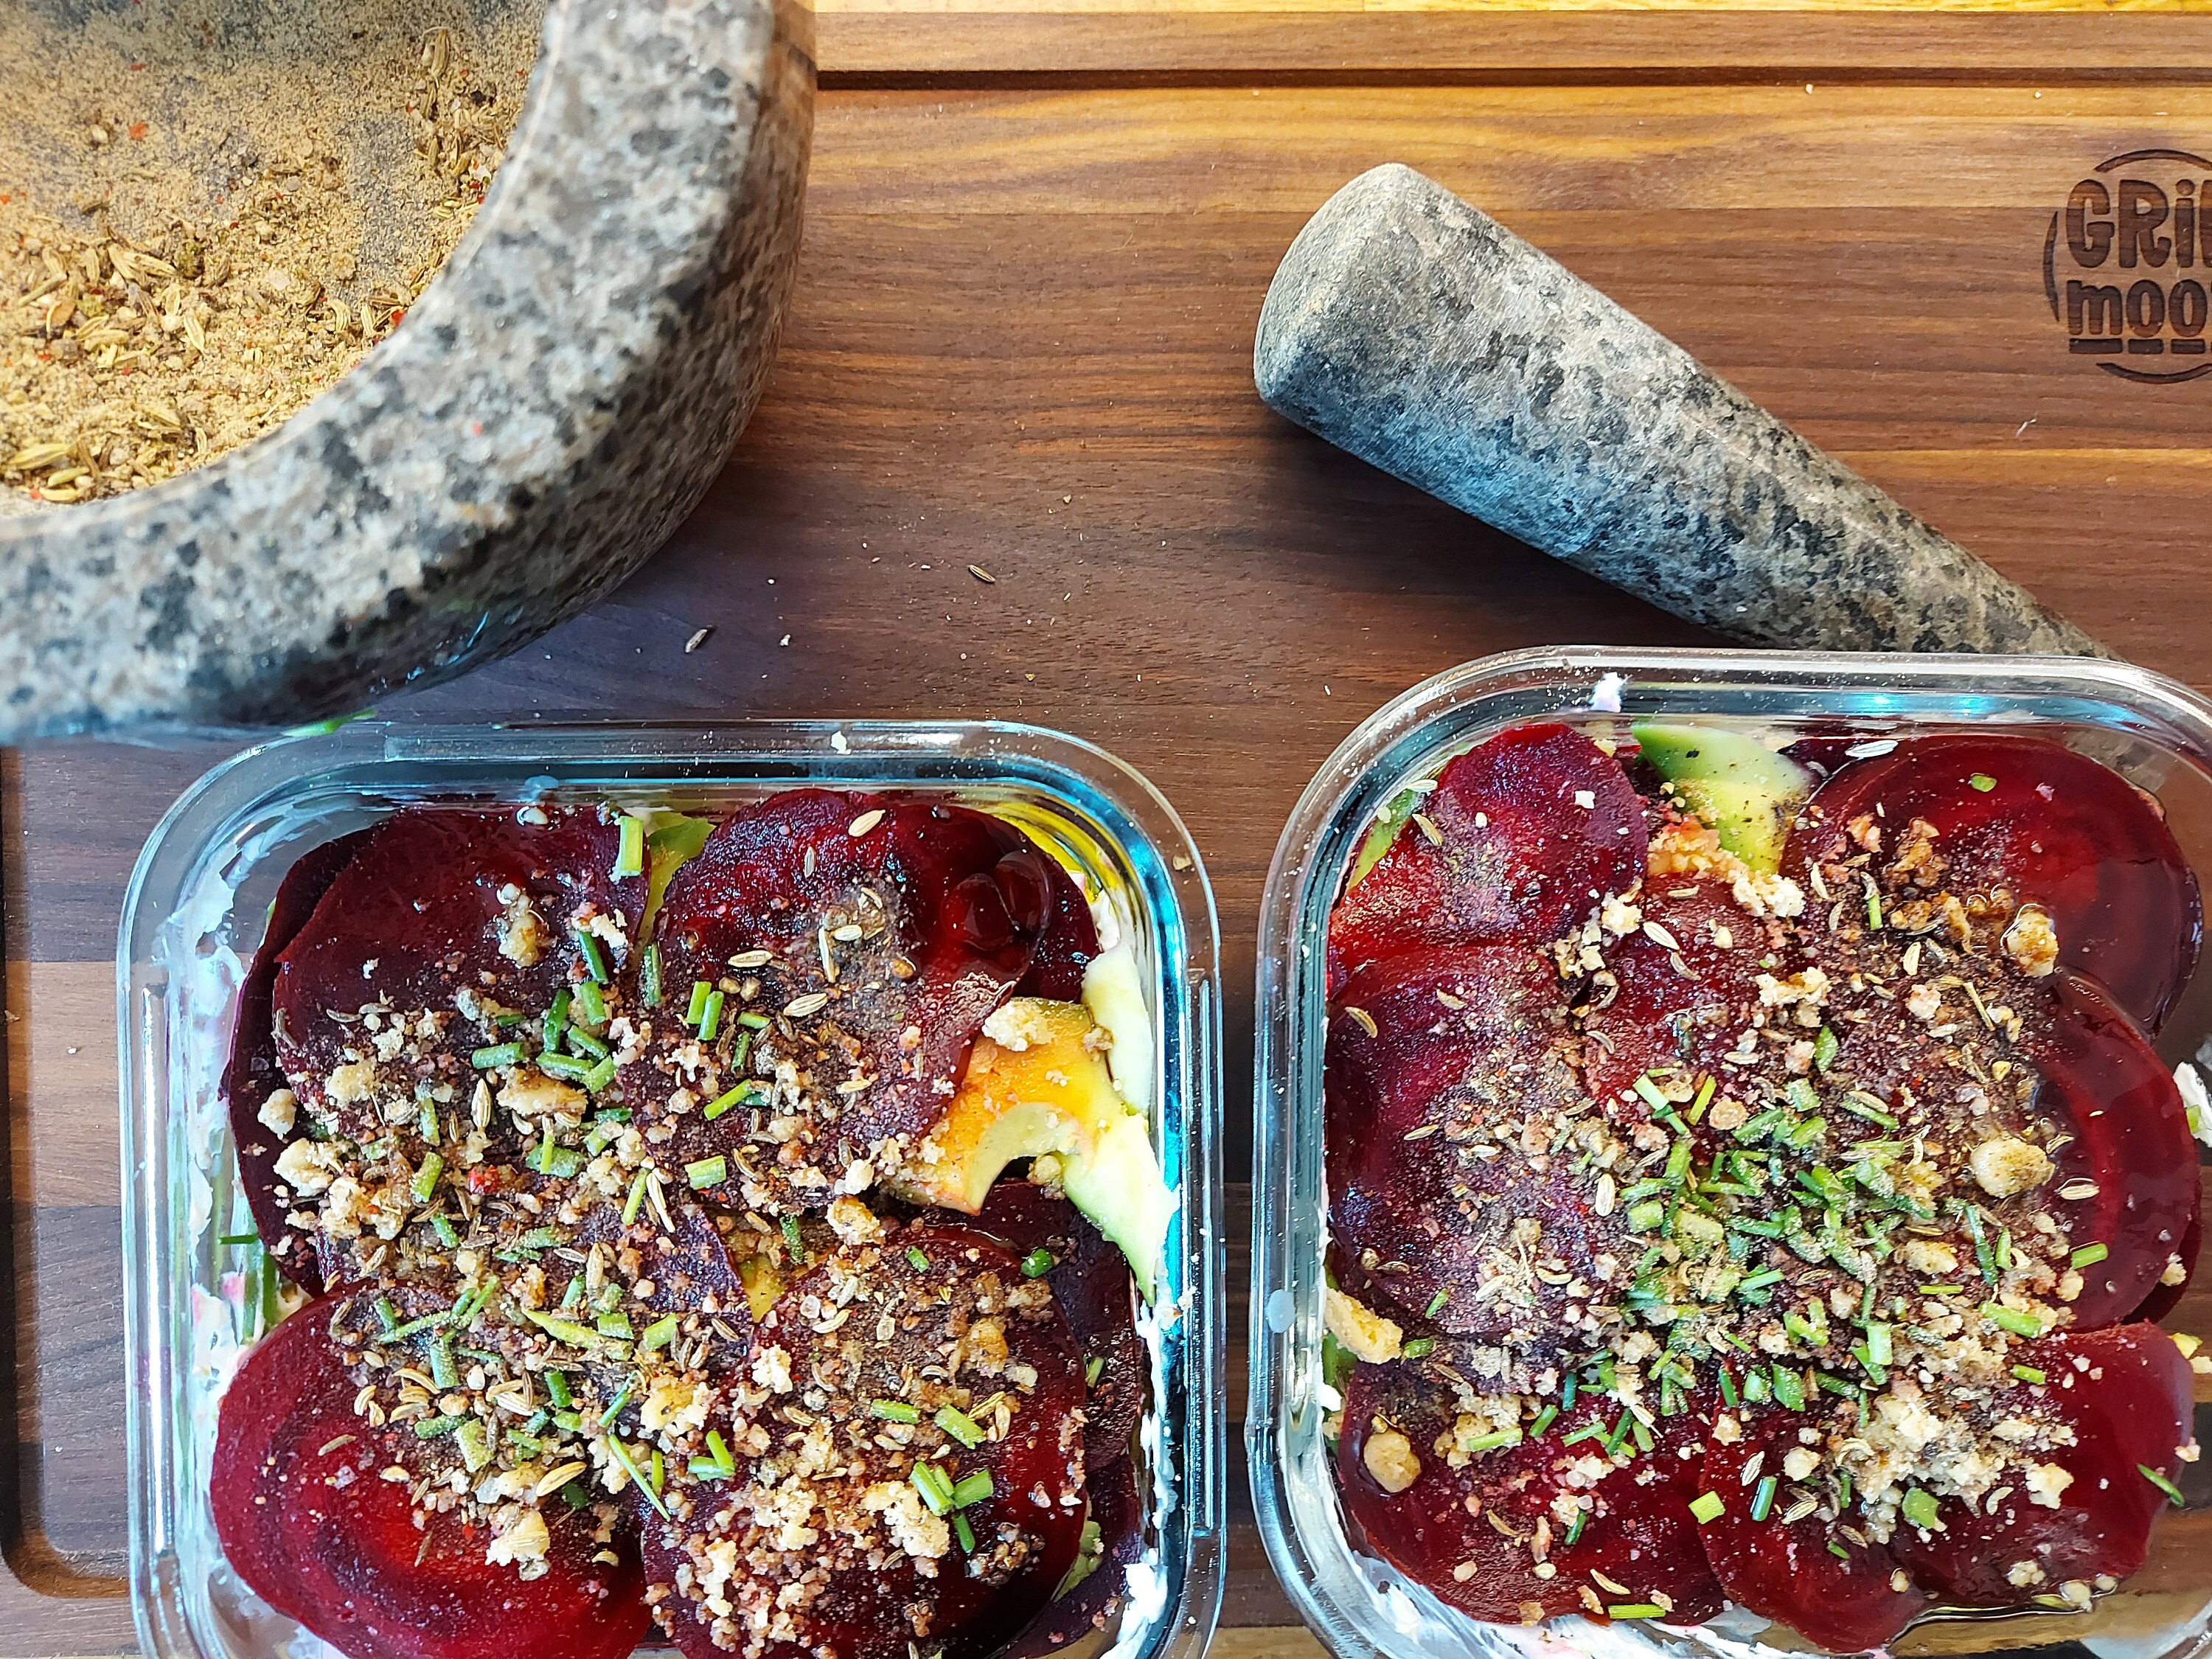 Beetroot and Goat cheese terrine